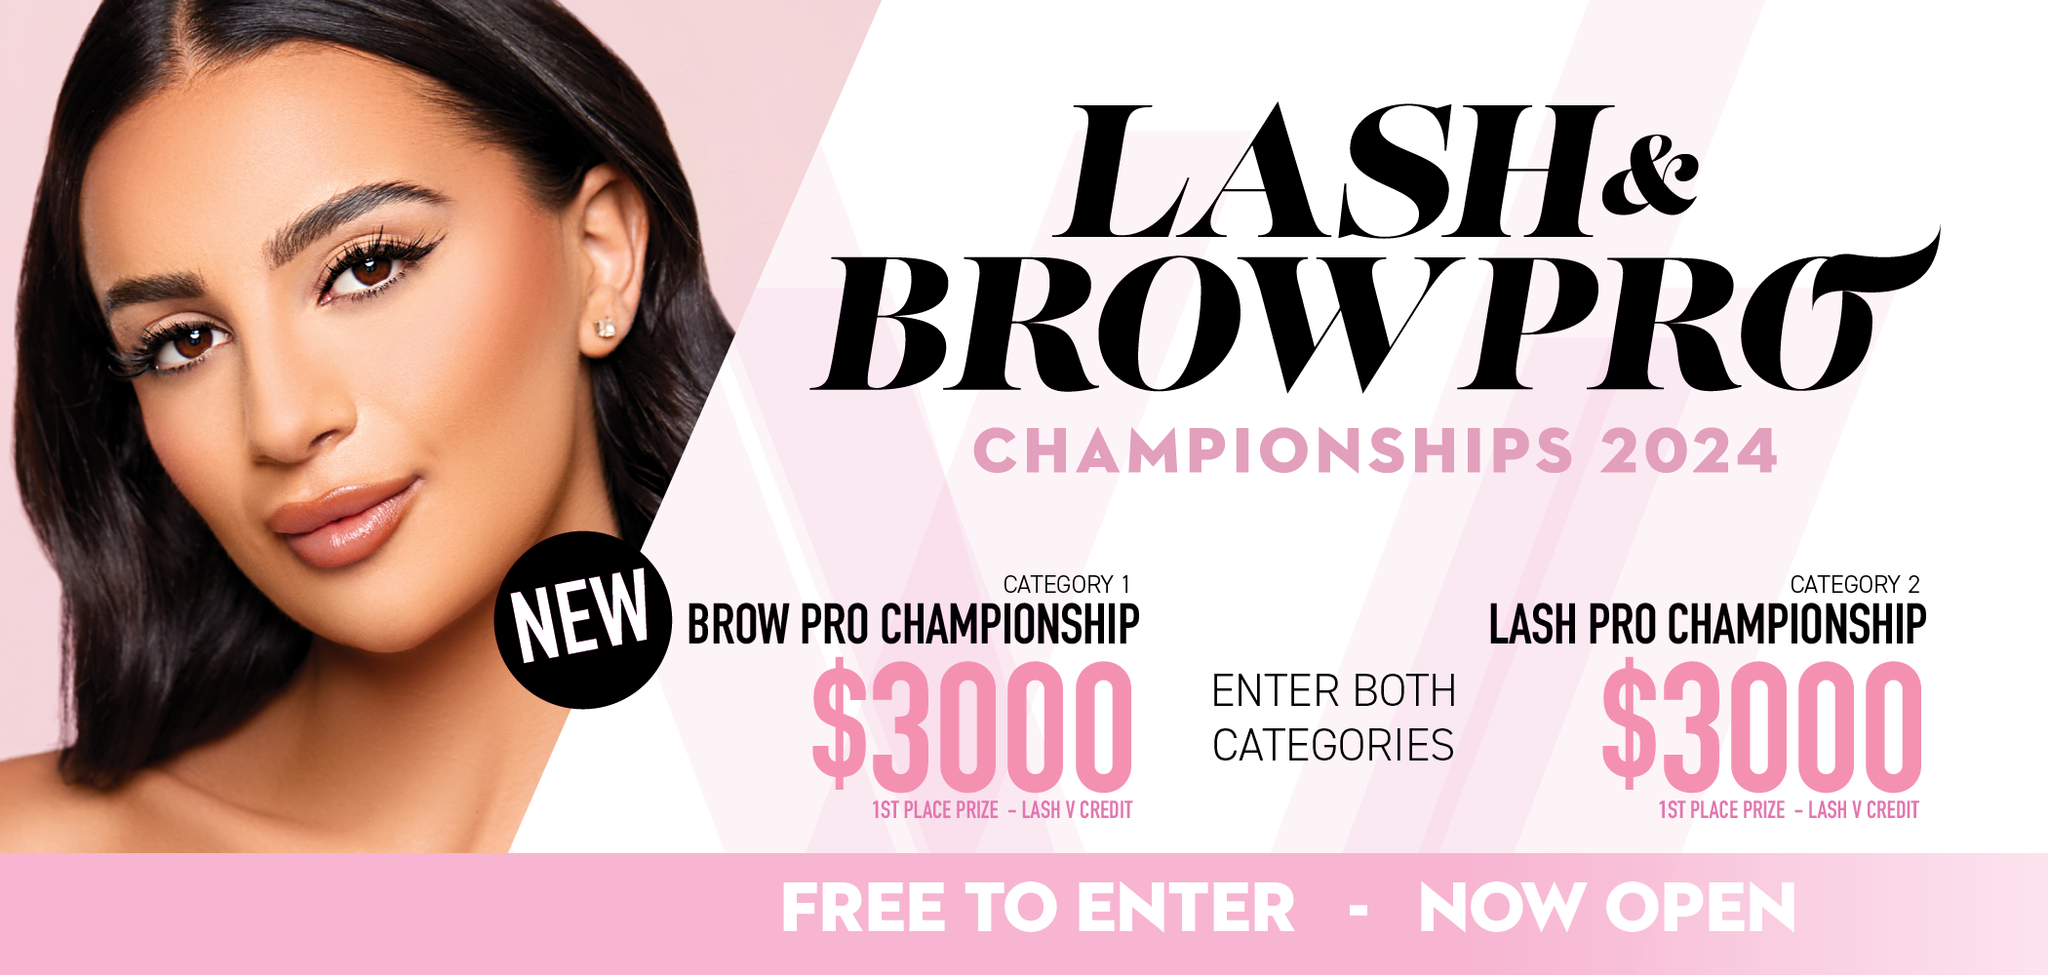 Why you need to enter the Lash & Brow Pro Championships 2024 - your chance to win $8000